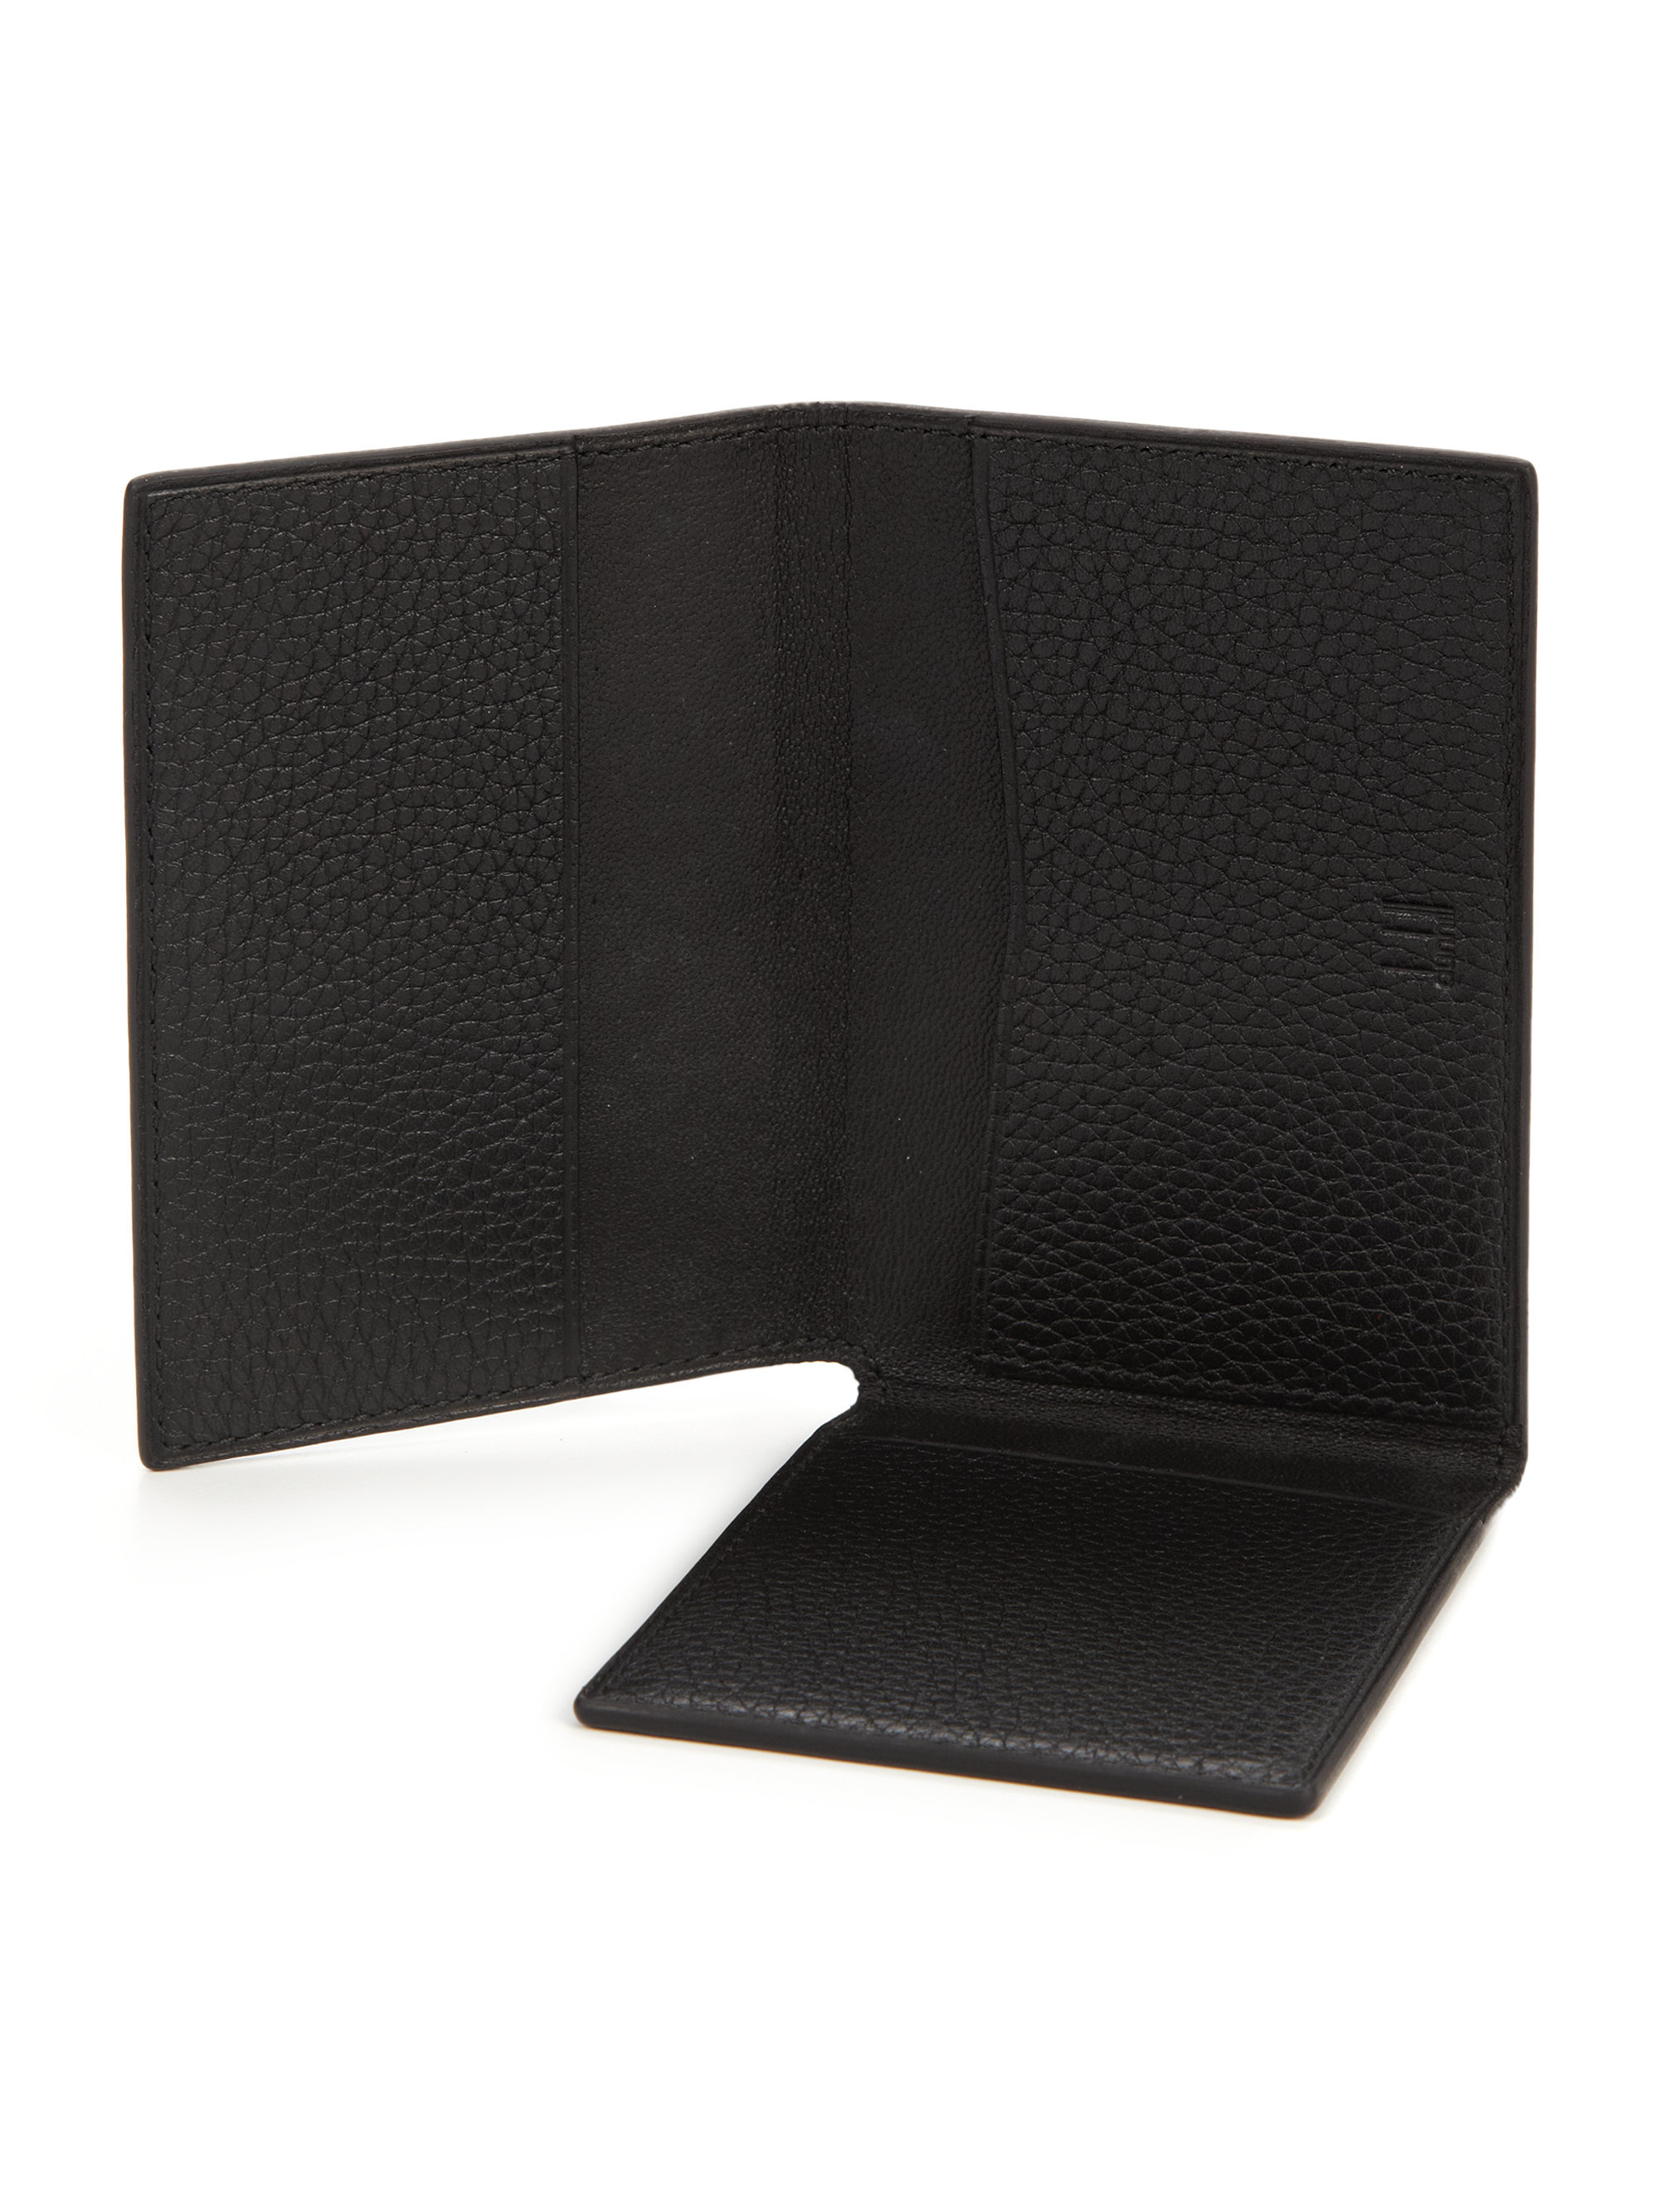 Lyst - Dunhill Boston Leather Trifold Wallet in Black for Men